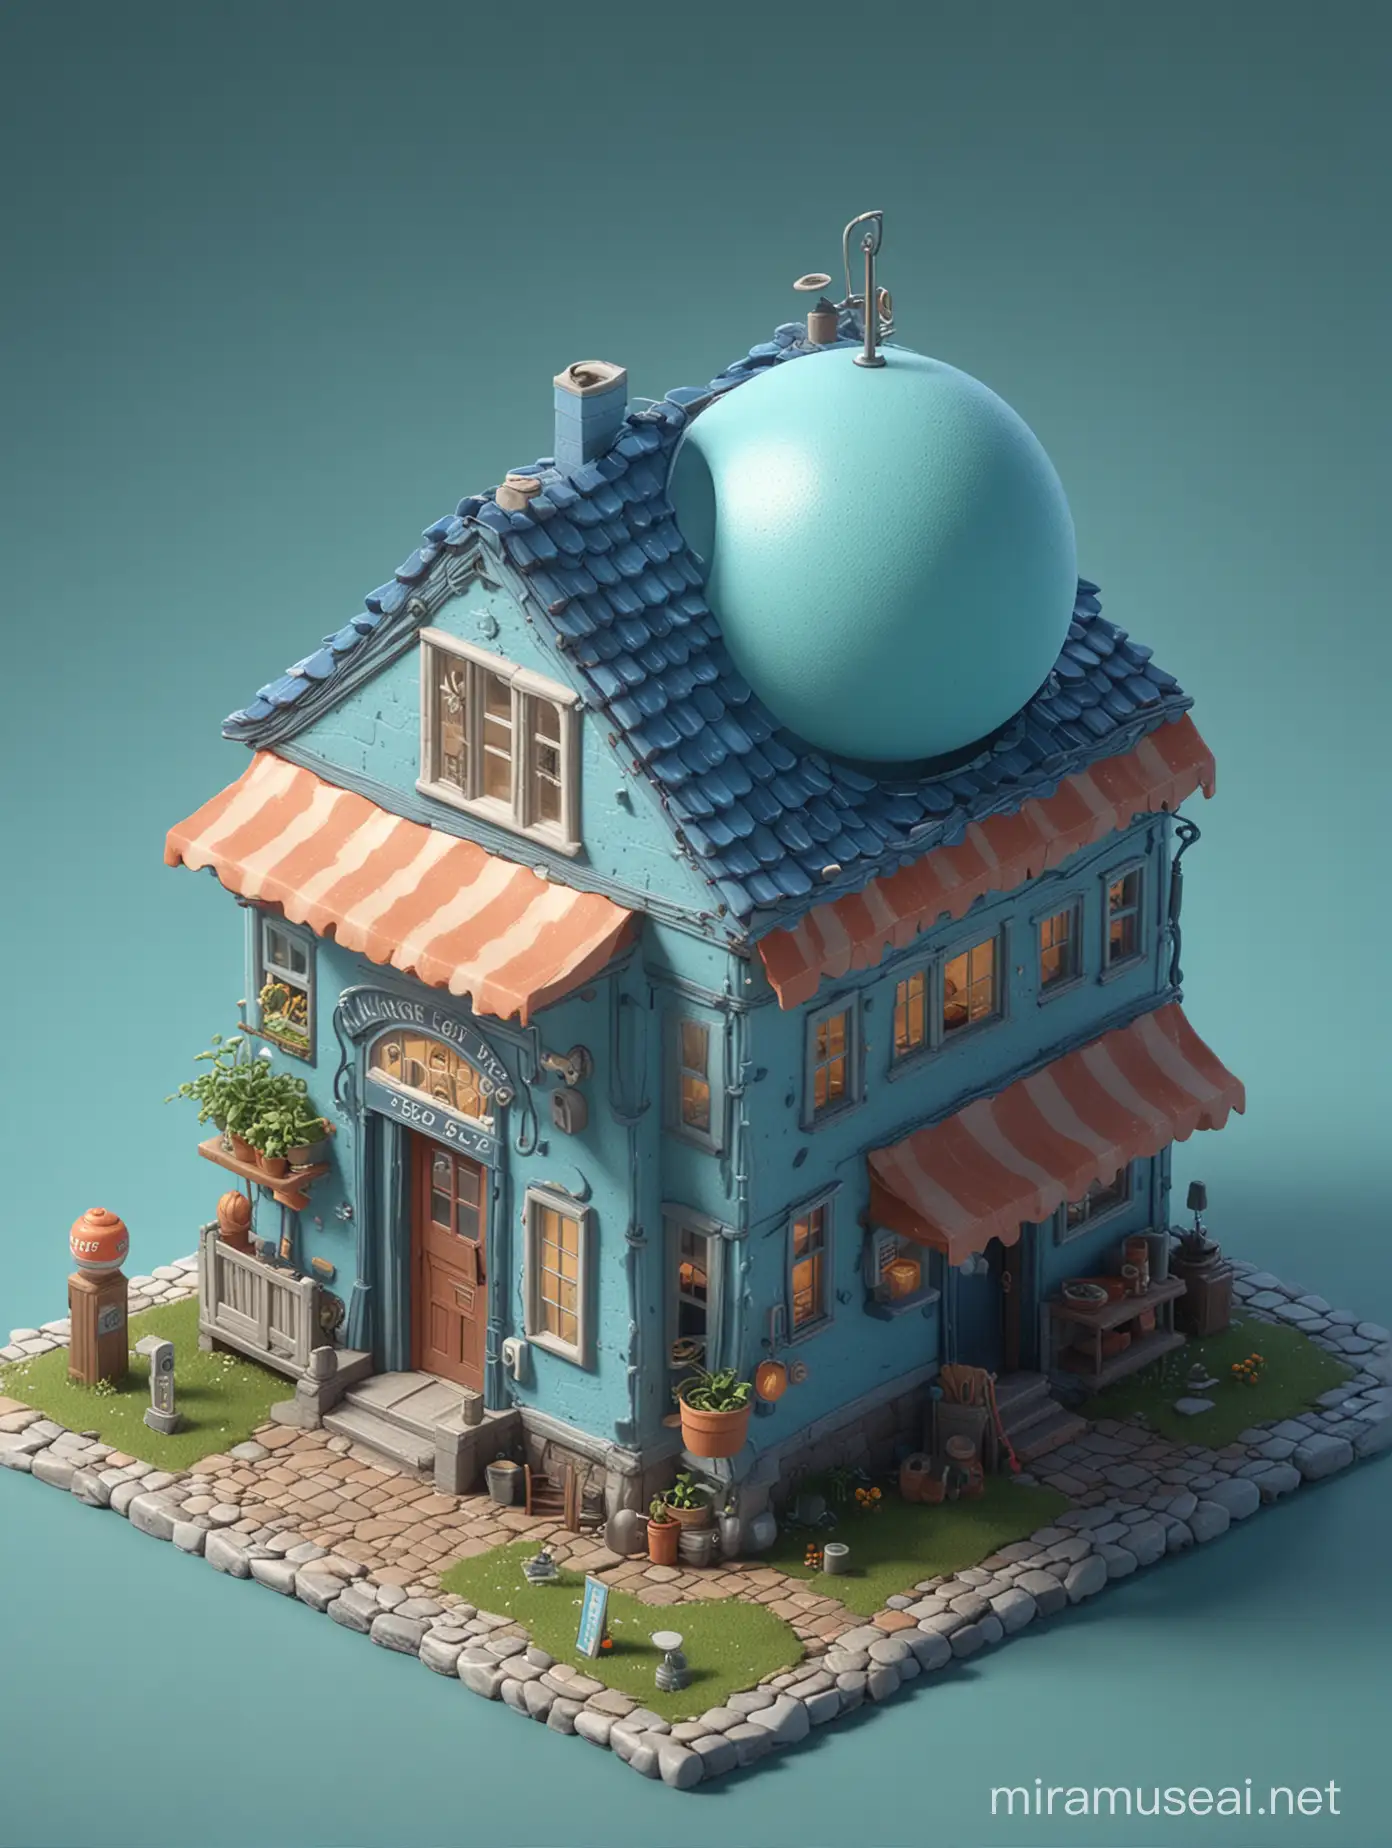 Isometric Blue House Assembly Line Engineering with Potter in Transparent Sphere 3D Art